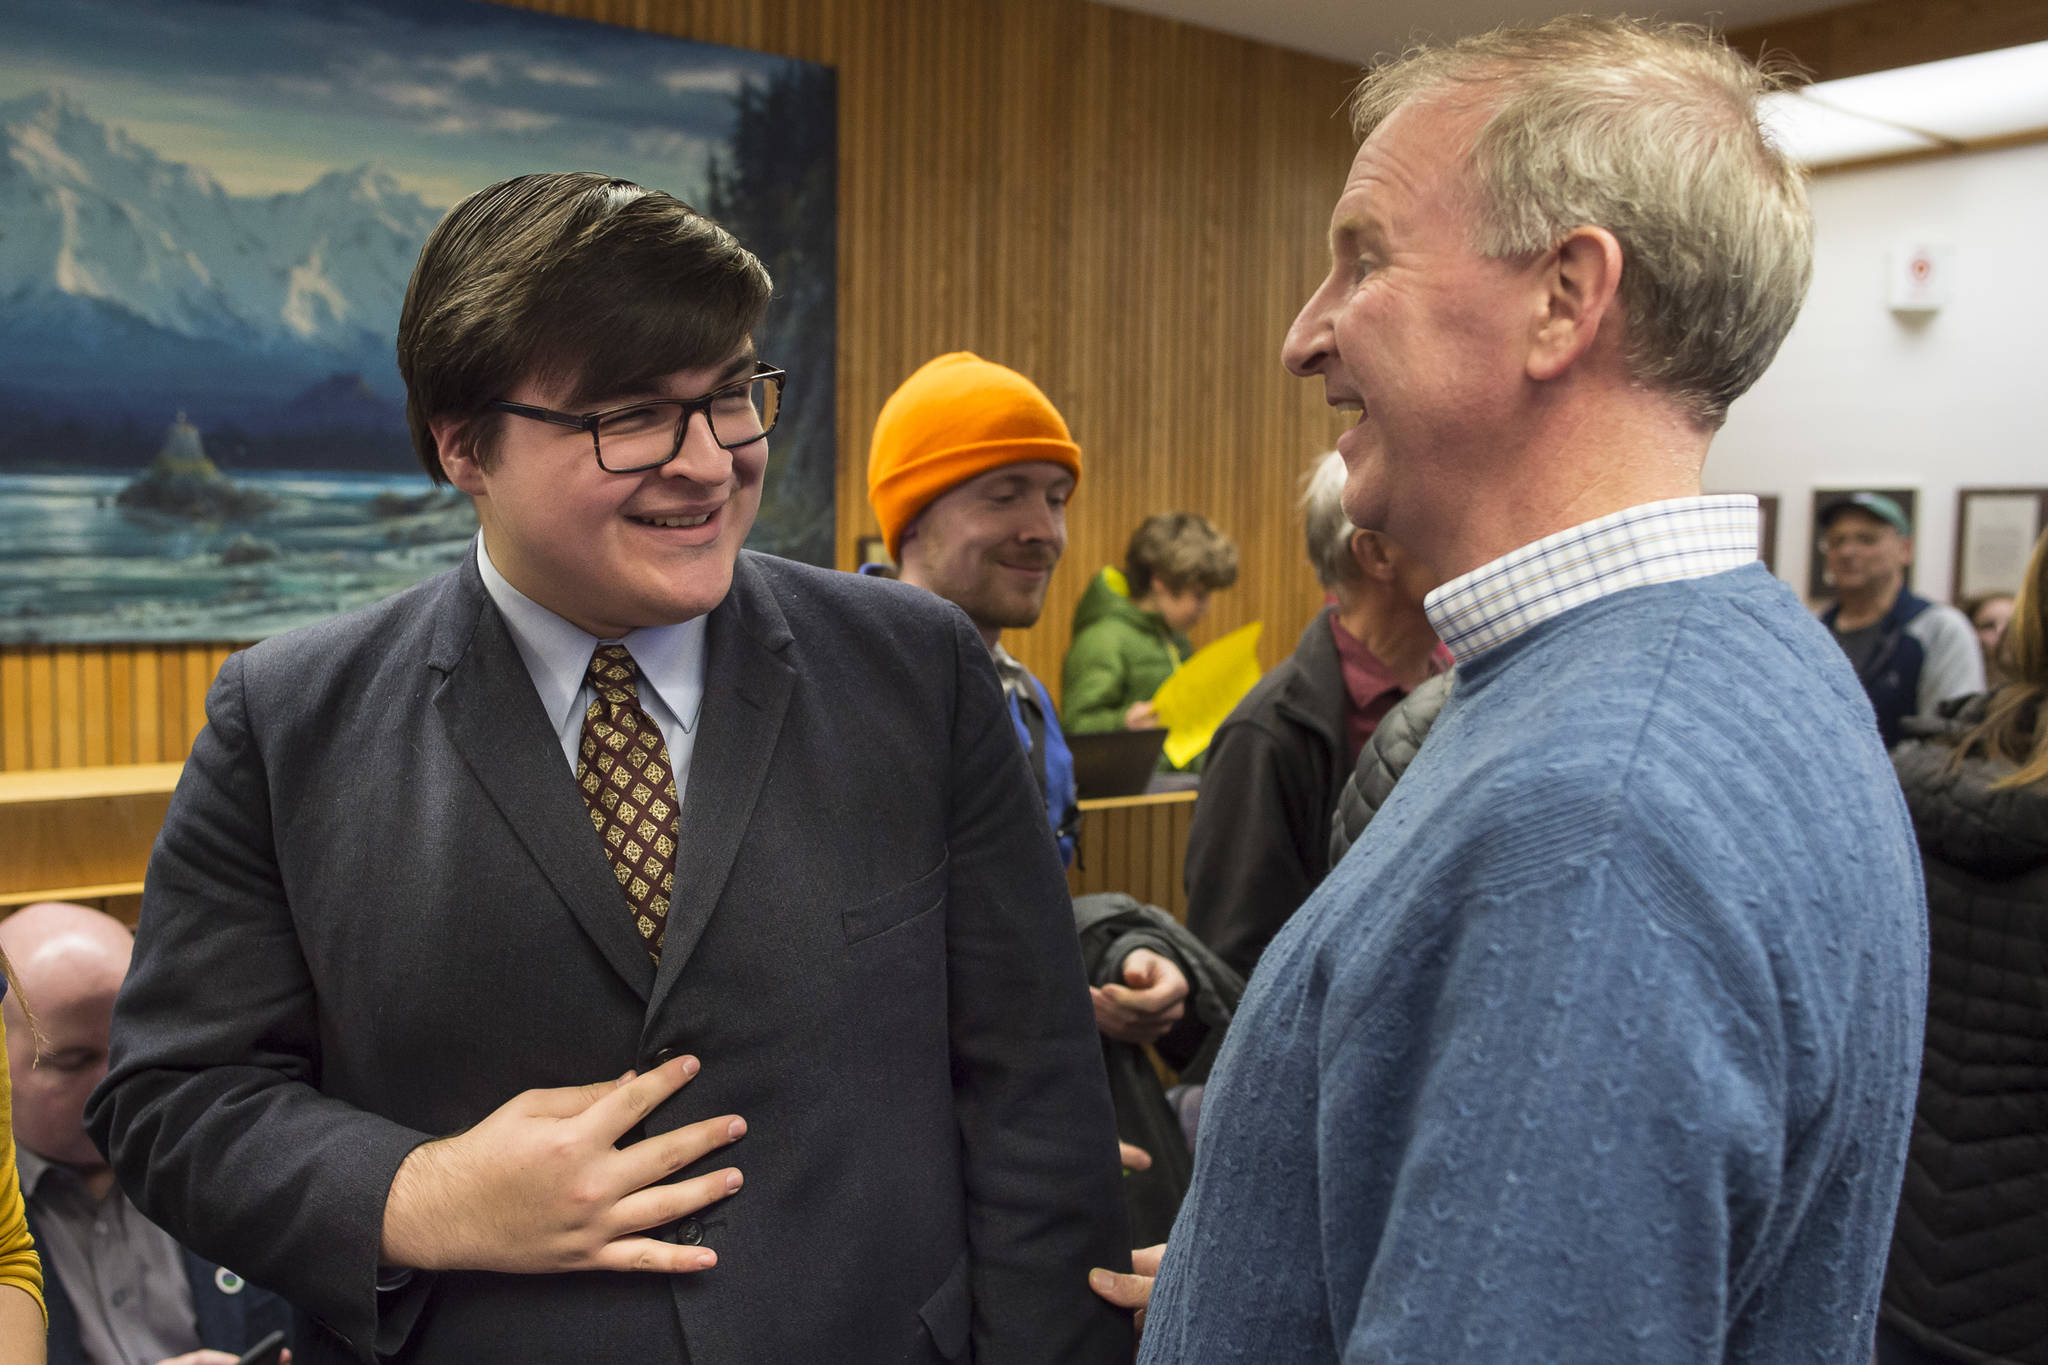 School Board candidate Kevin Allen, left, is congratulated by School Board President Brian Holst during Election night in the Assembly chambers on Tuesday, Oct. 2, 2018. (Michael Penn | Juneau Empire)